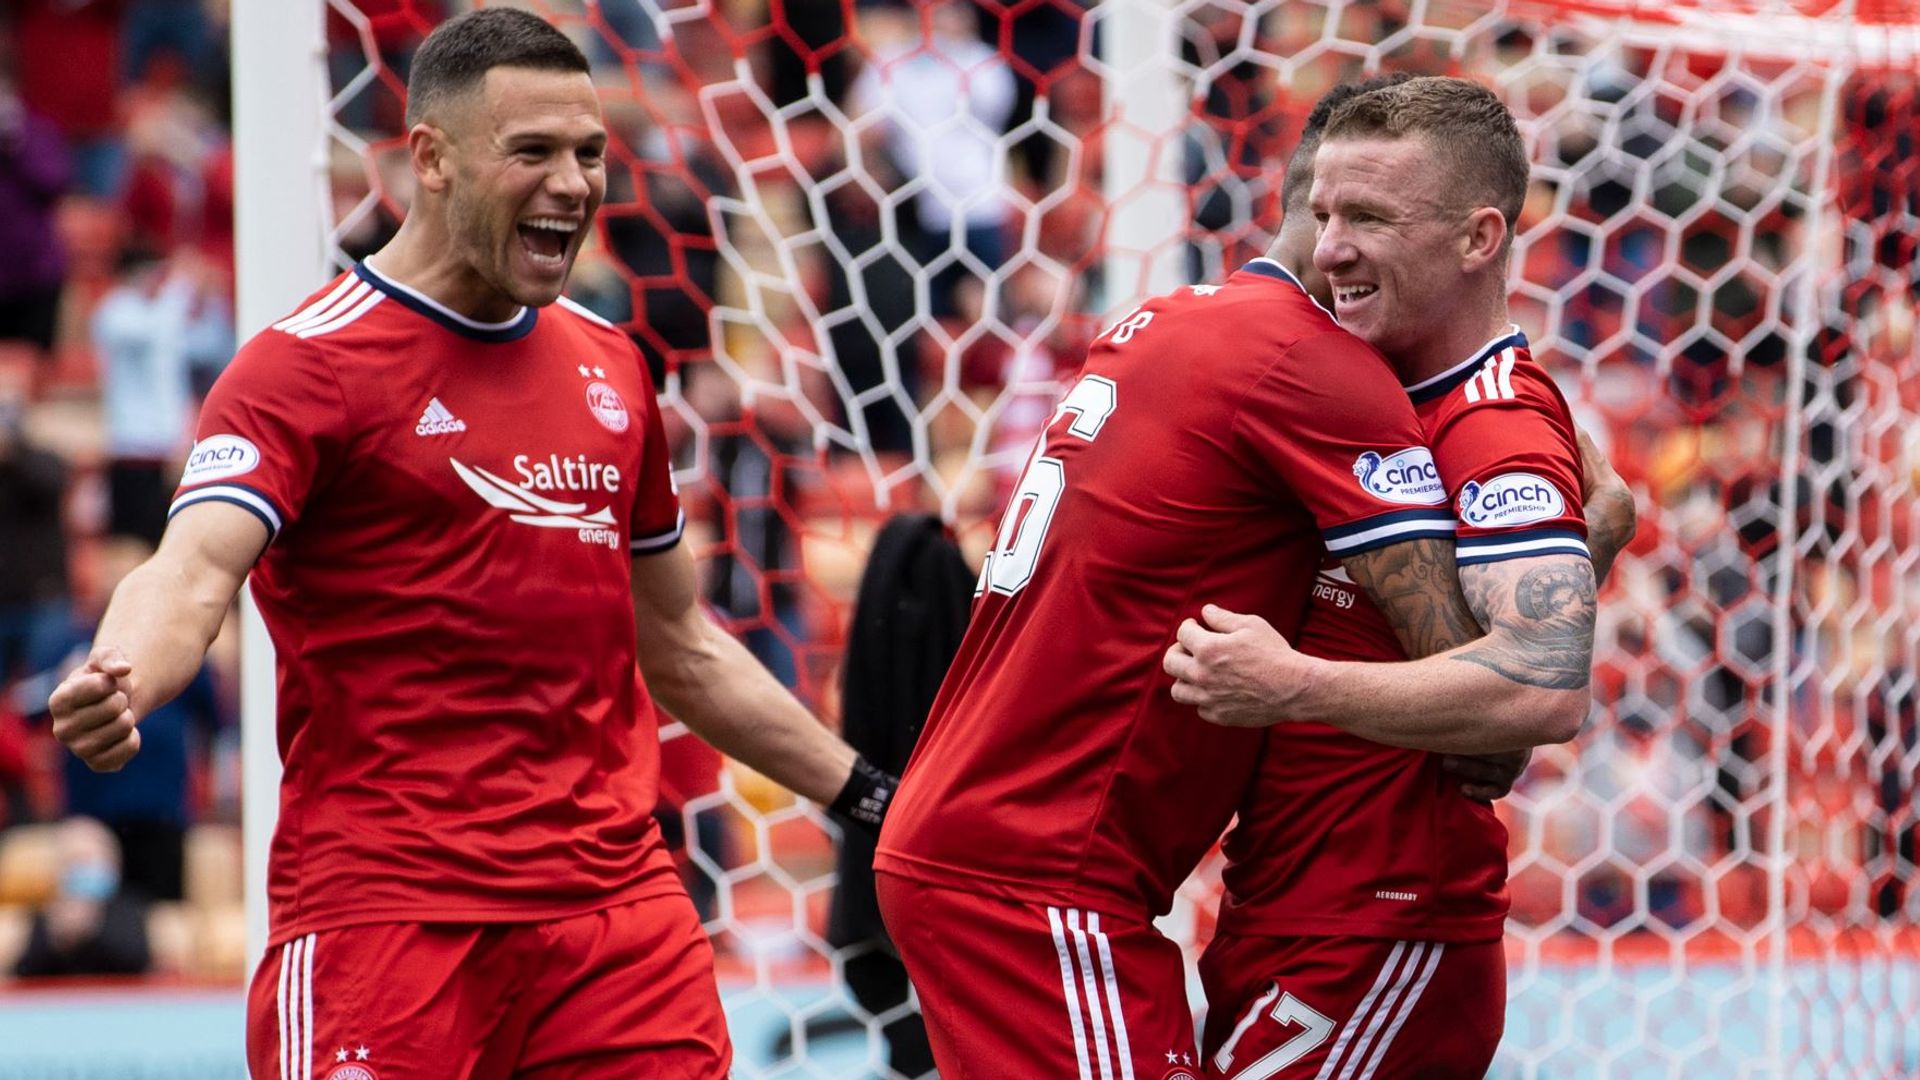 Aberdeen ease past Dundee United